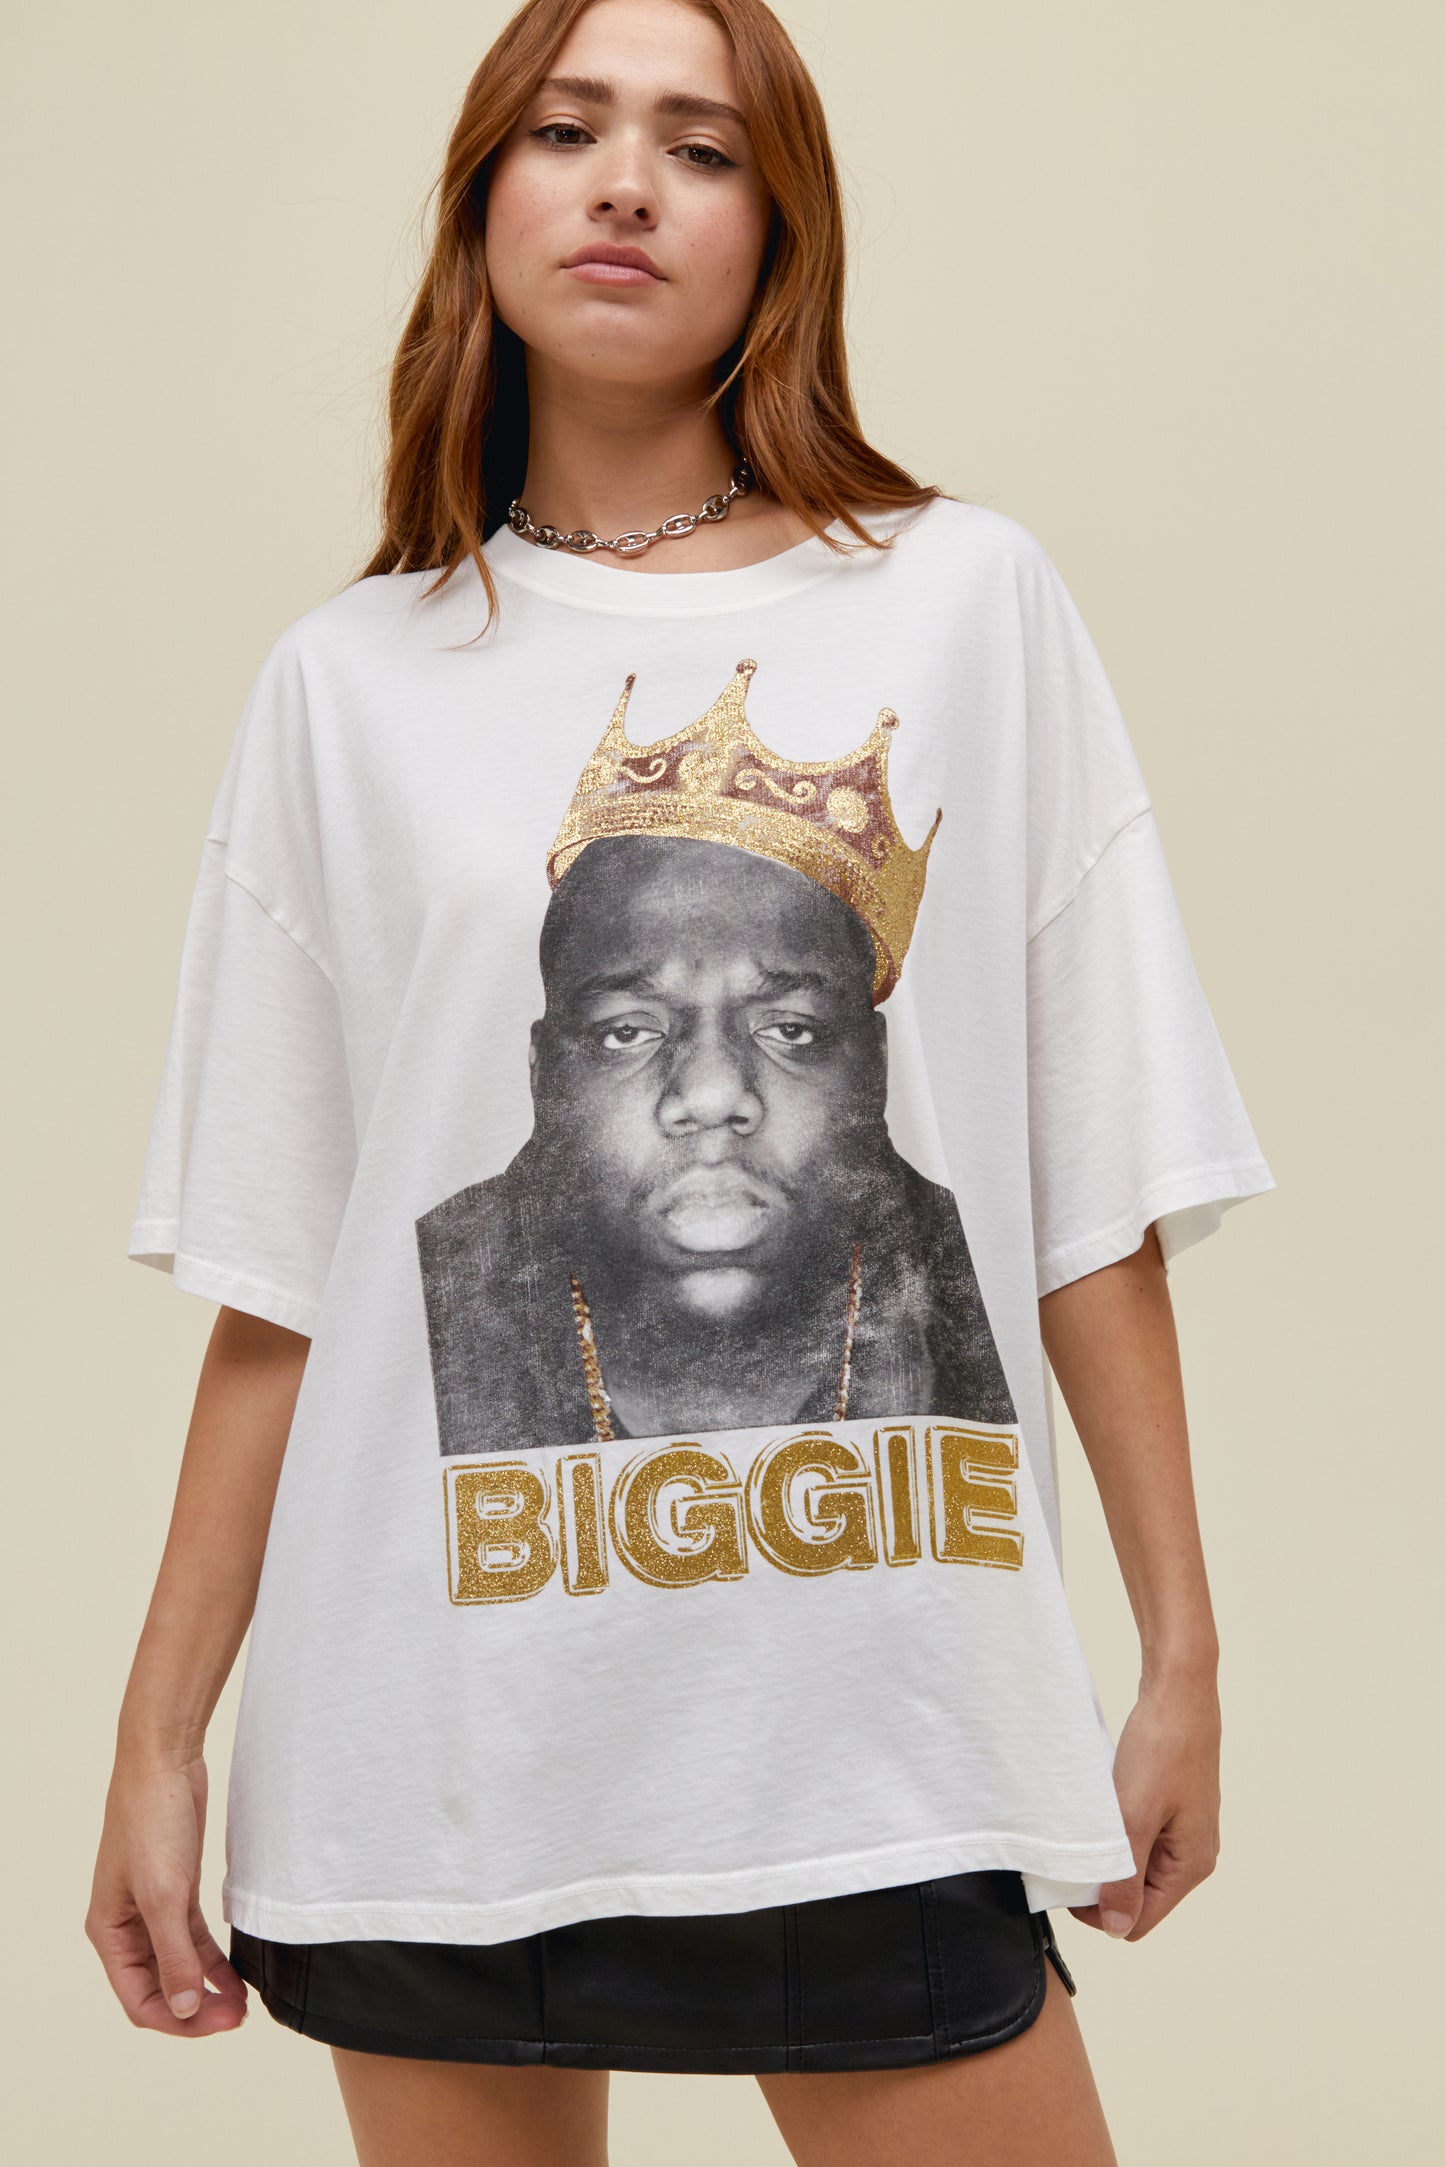 A straight-haired model featuring a white tee stamped with 'Biggie' and a crown graphic accented in gold with an authentic portrait of the rapper.